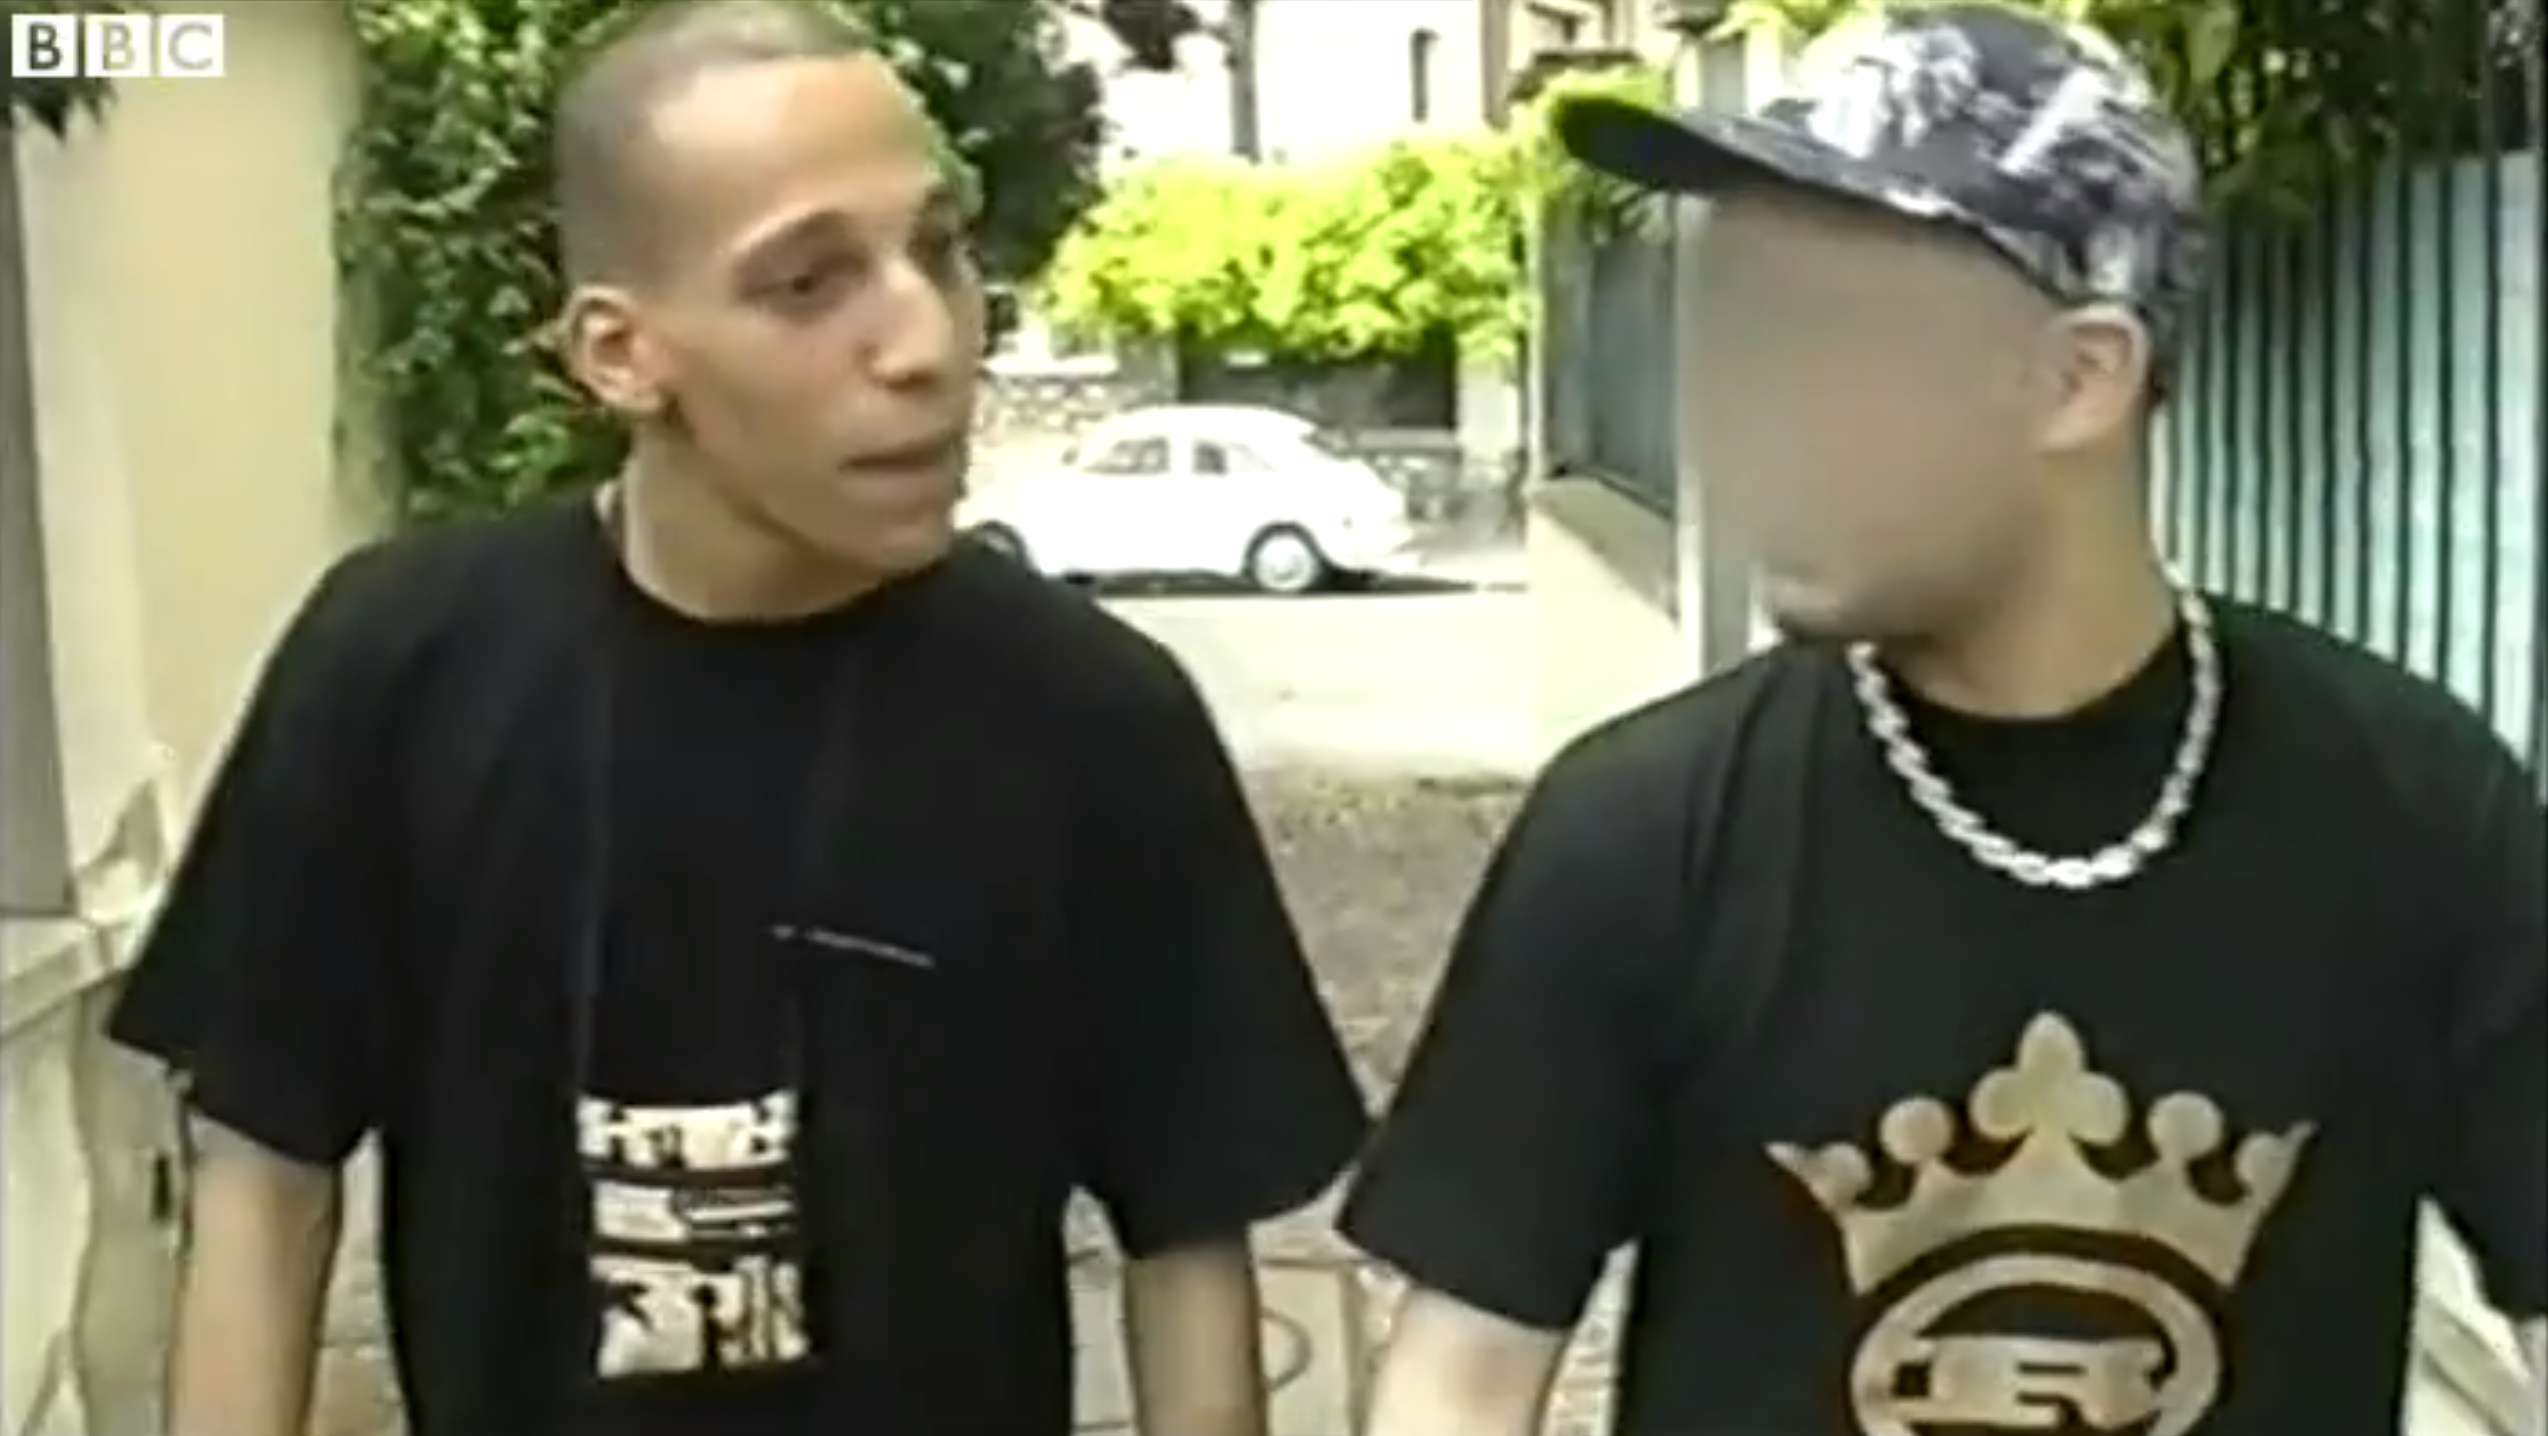 Charlie Hebdo attacker Cherif Kouachi (left), pictured in a 2005 French television documentary. Photo: Handout